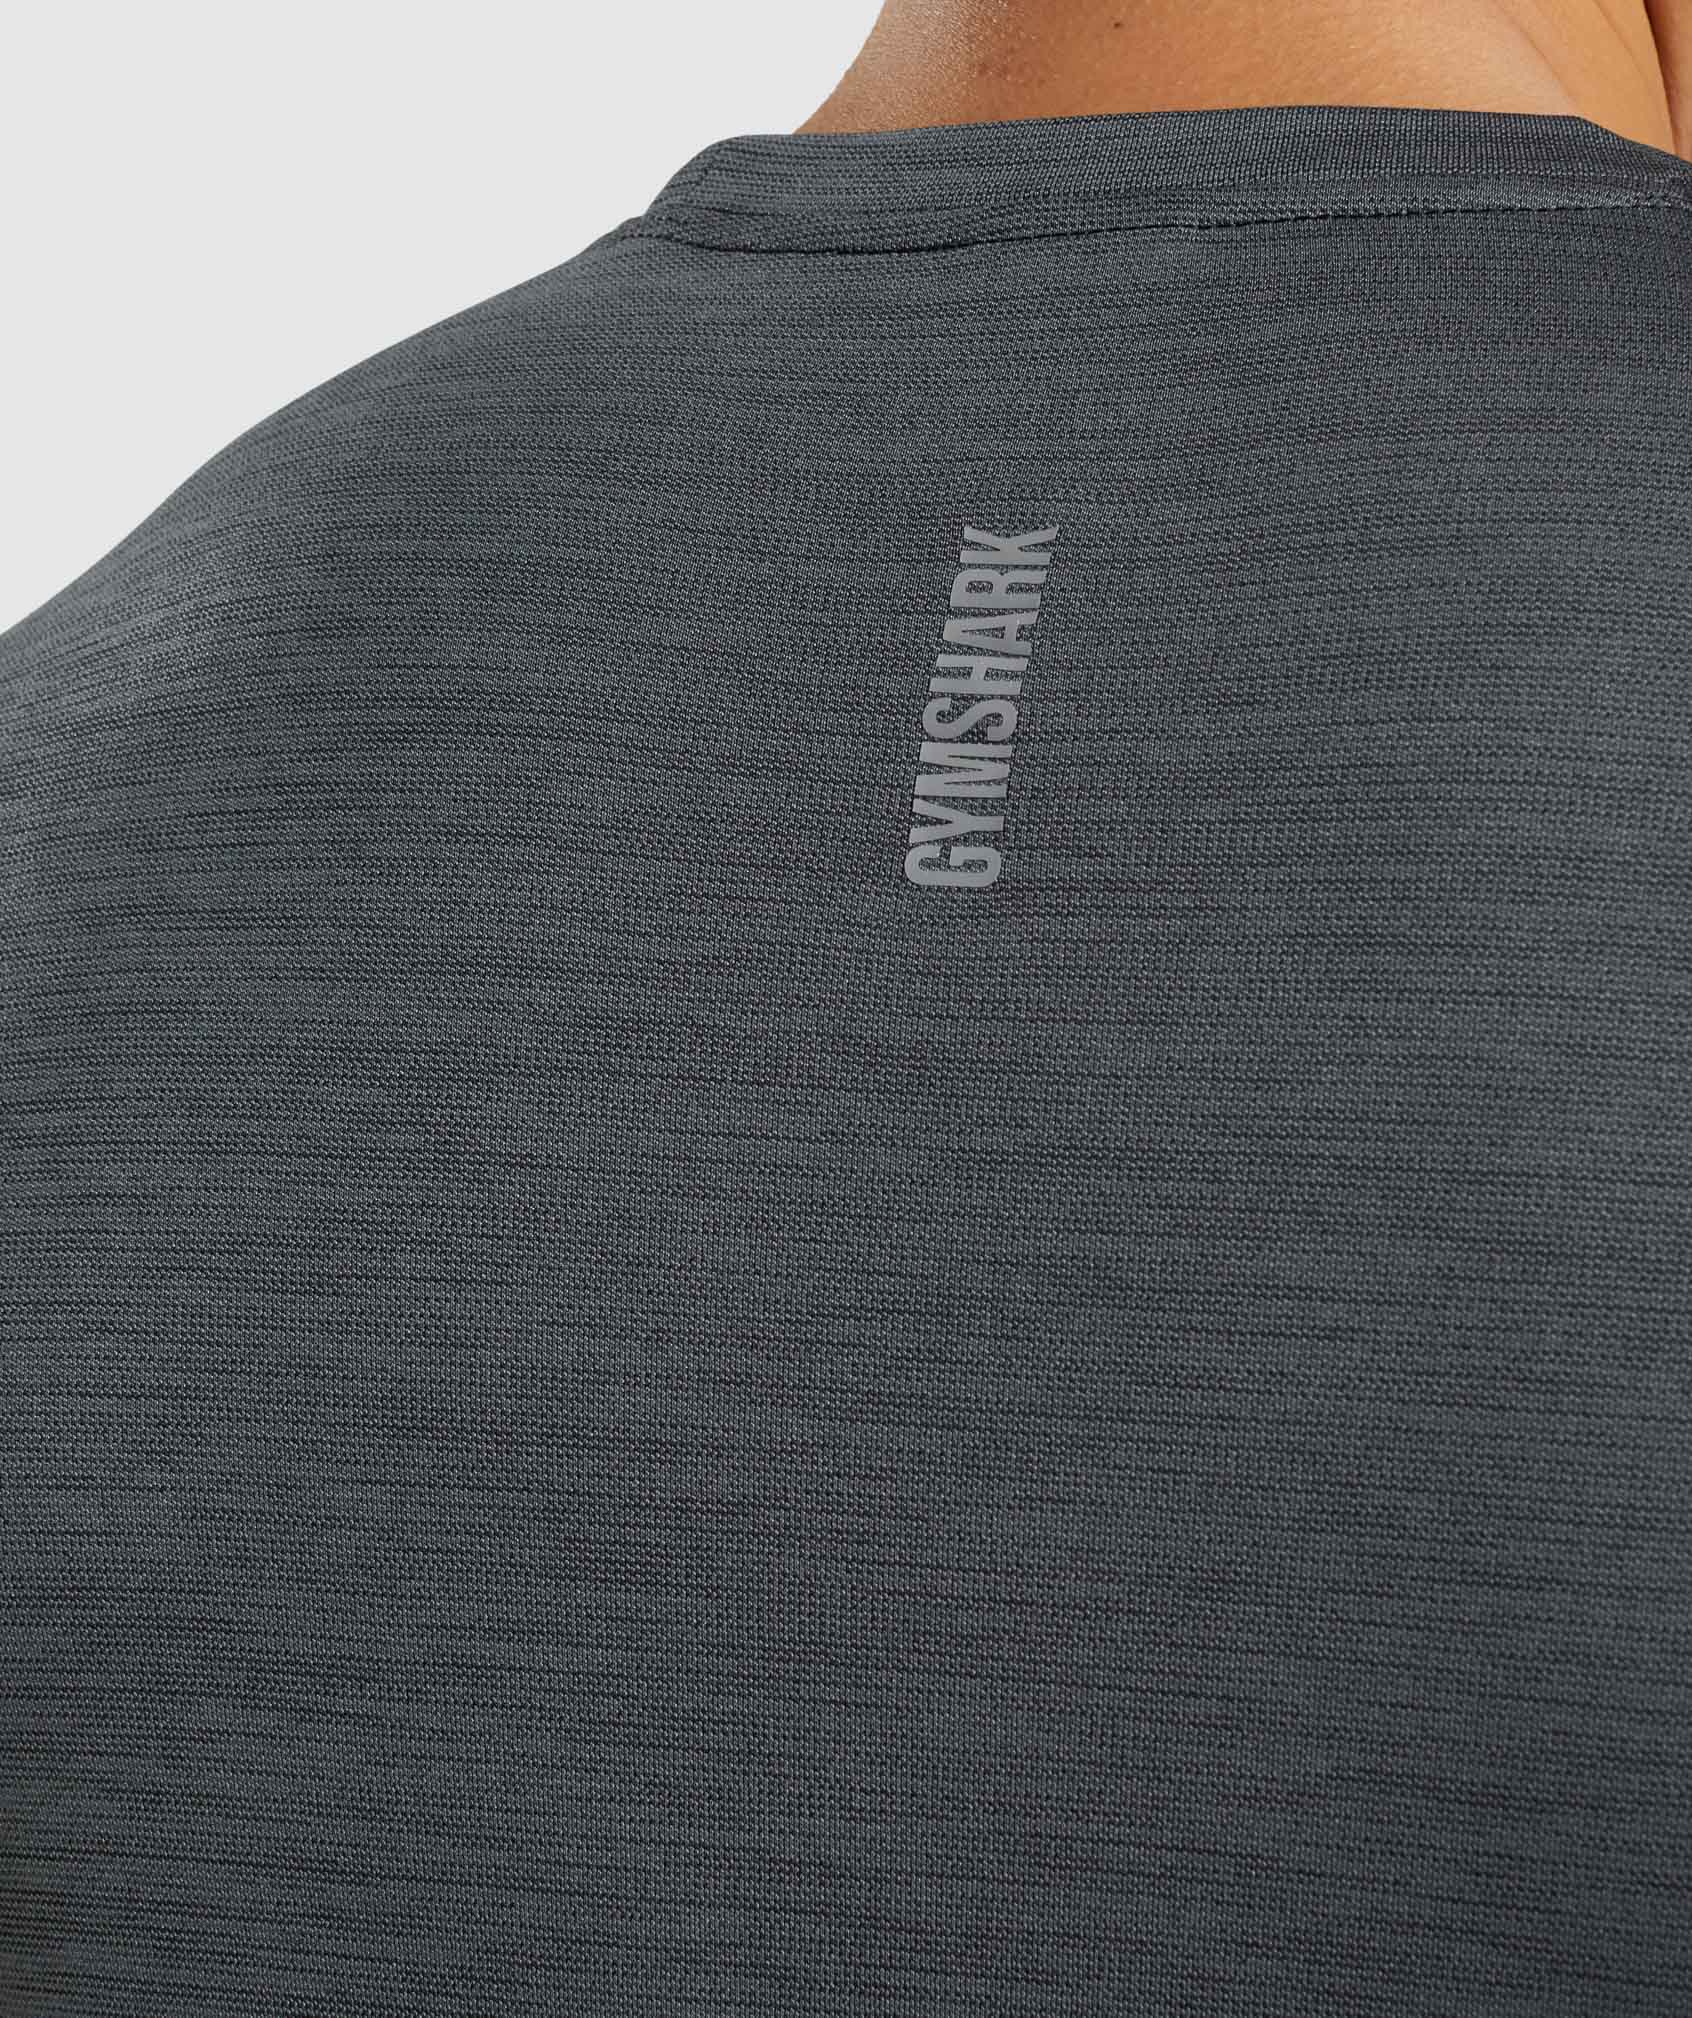 Speed T-Shirt in Black/Charcoal Marl - view 6